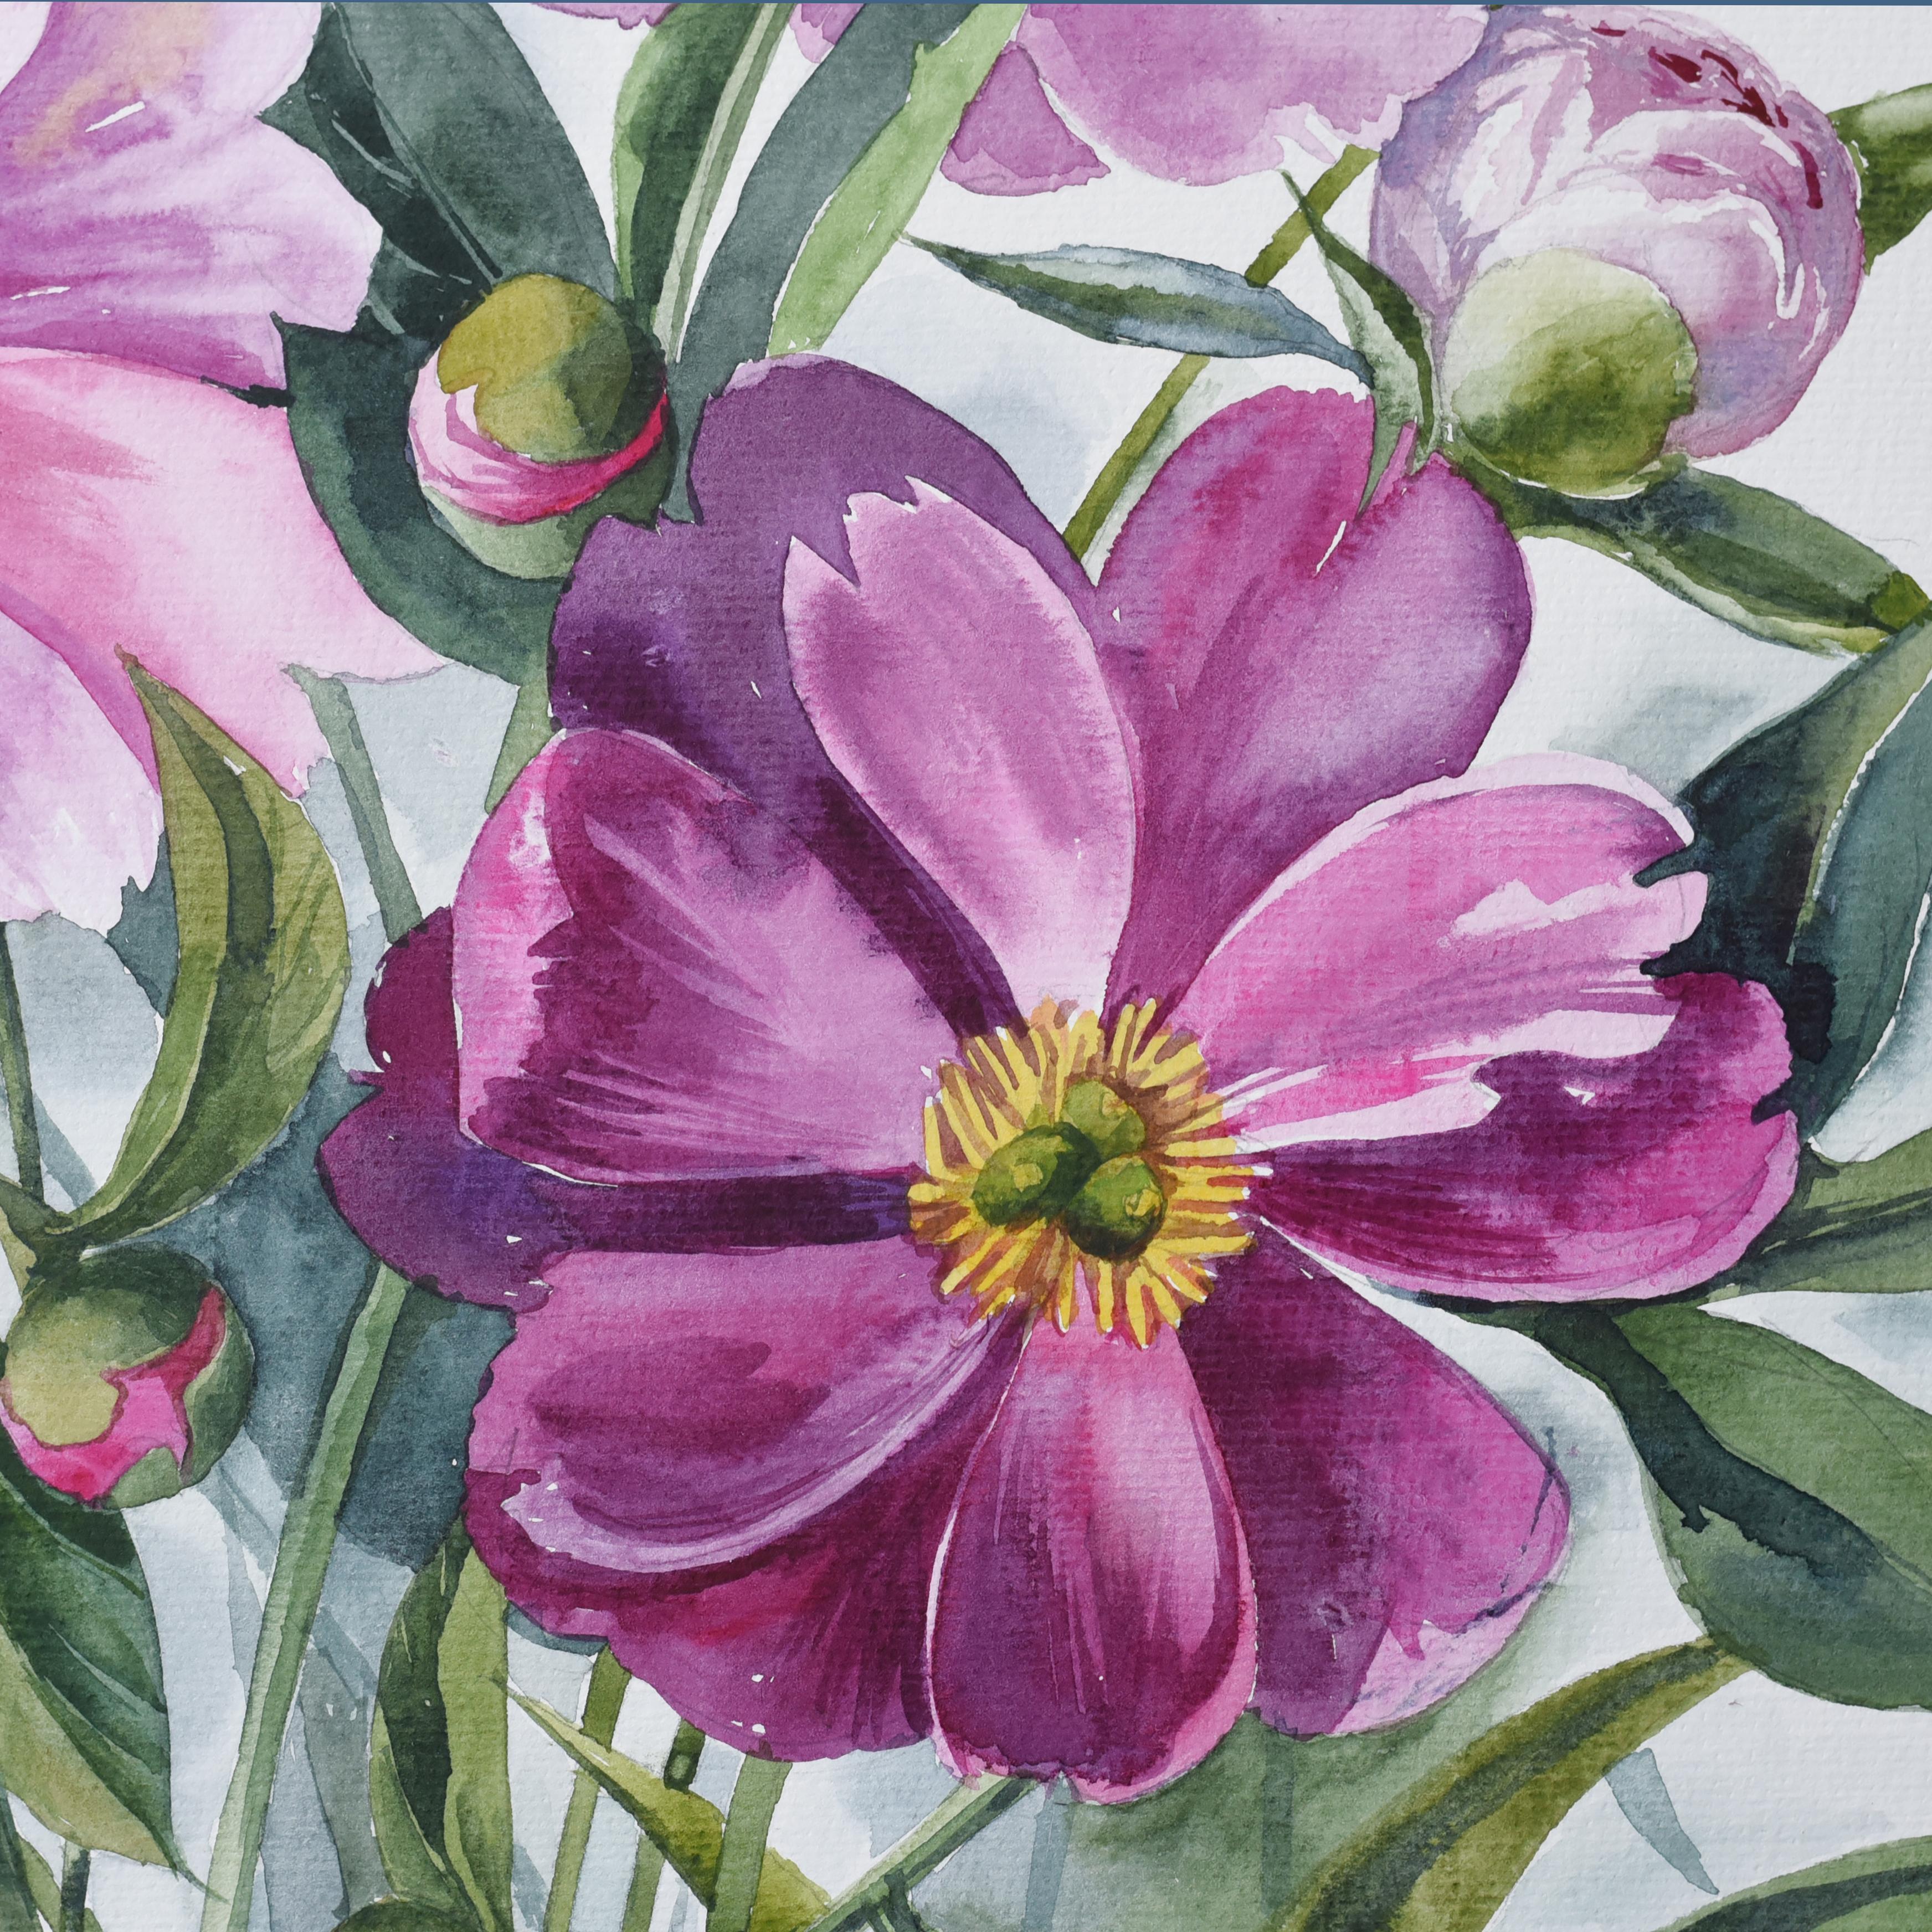 Original watercolor painted on professional watercolor paper

Peonies from my garden